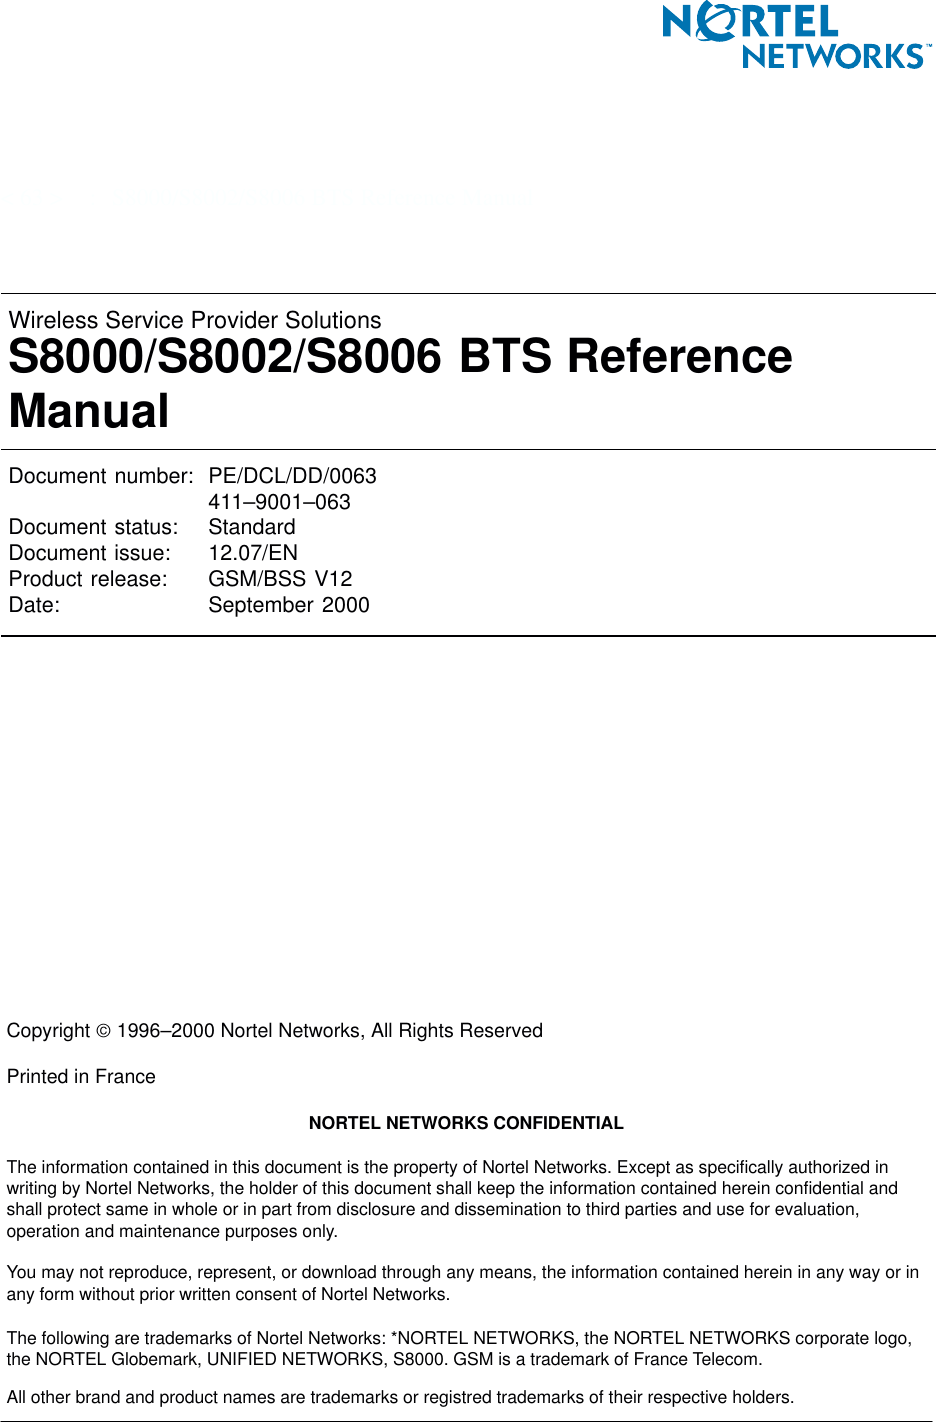 &lt; 63 &gt; : S8000/S8002/S8006 BTS Reference ManualWireless Service Provider SolutionsS8000/S8002/S8006 BTS ReferenceManualDocument number: PE/DCL/DD/0063411–9001–063Document status: StandardDocument issue: 12.07/ENProduct release: GSM/BSS V12Date: September 2000Copyright  1996–2000 Nortel Networks, All Rights ReservedPrinted in FranceNORTEL NETWORKS CONFIDENTIALThe information contained in this document is the property of Nortel Networks. Except as specifically authorized inwriting by Nortel Networks, the holder of this document shall keep the information contained herein confidential andshall protect same in whole or in part from disclosure and dissemination to third parties and use for evaluation,operation and maintenance purposes only.You may not reproduce, represent, or download through any means, the information contained herein in any way or inany form without prior written consent of Nortel Networks.The following are trademarks of Nortel Networks: *NORTEL NETWORKS, the NORTEL NETWORKS corporate logo,the NORTEL Globemark, UNIFIED NETWORKS, S8000. GSM is a trademark of France Telecom.All other brand and product names are trademarks or registred trademarks of their respective holders.